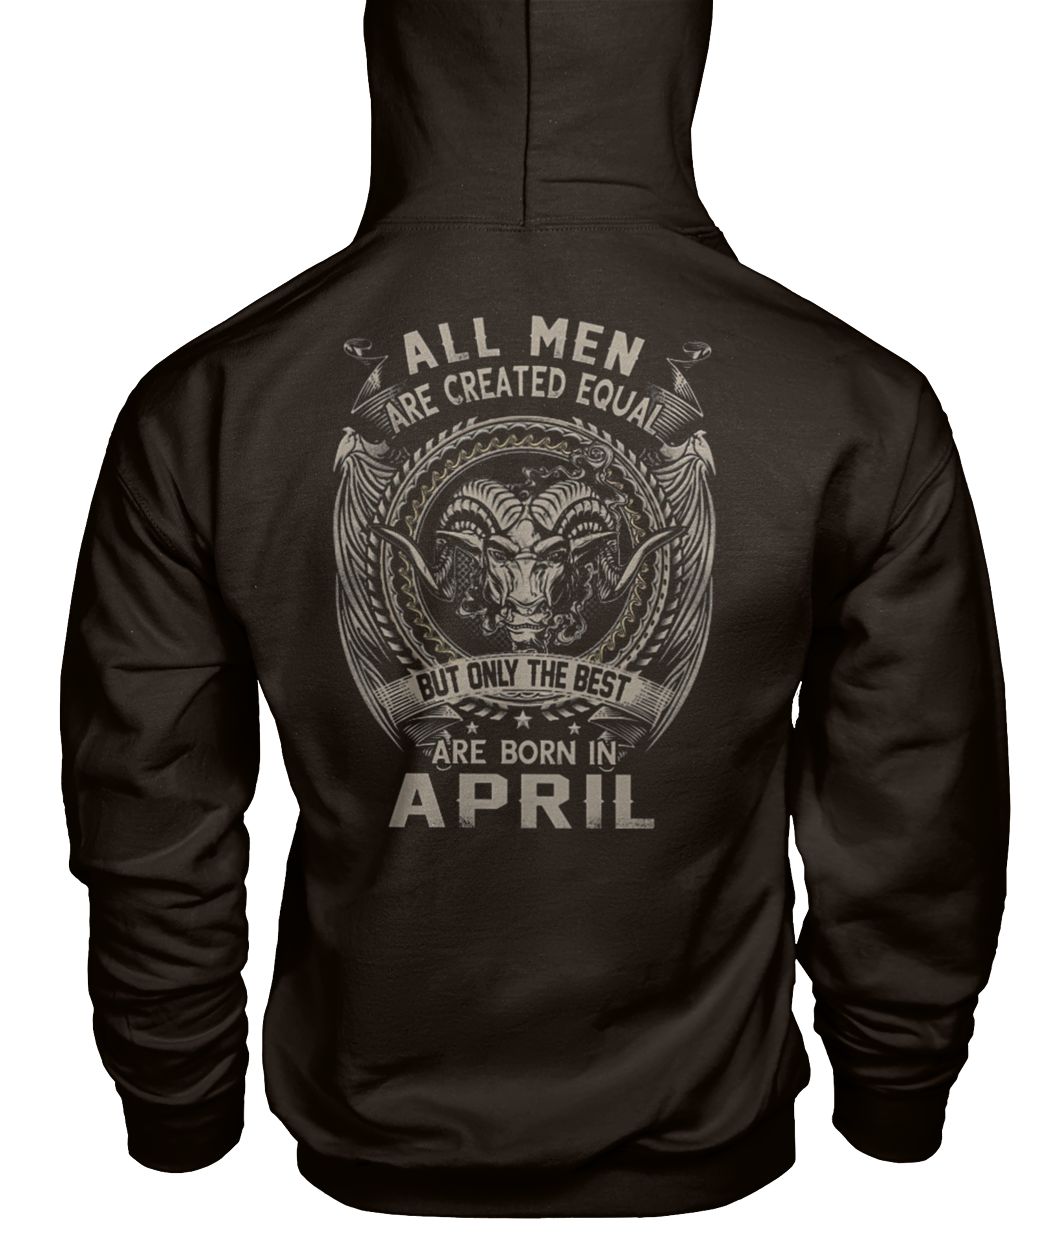 All men created equal but the best are born in april gildan hoodie